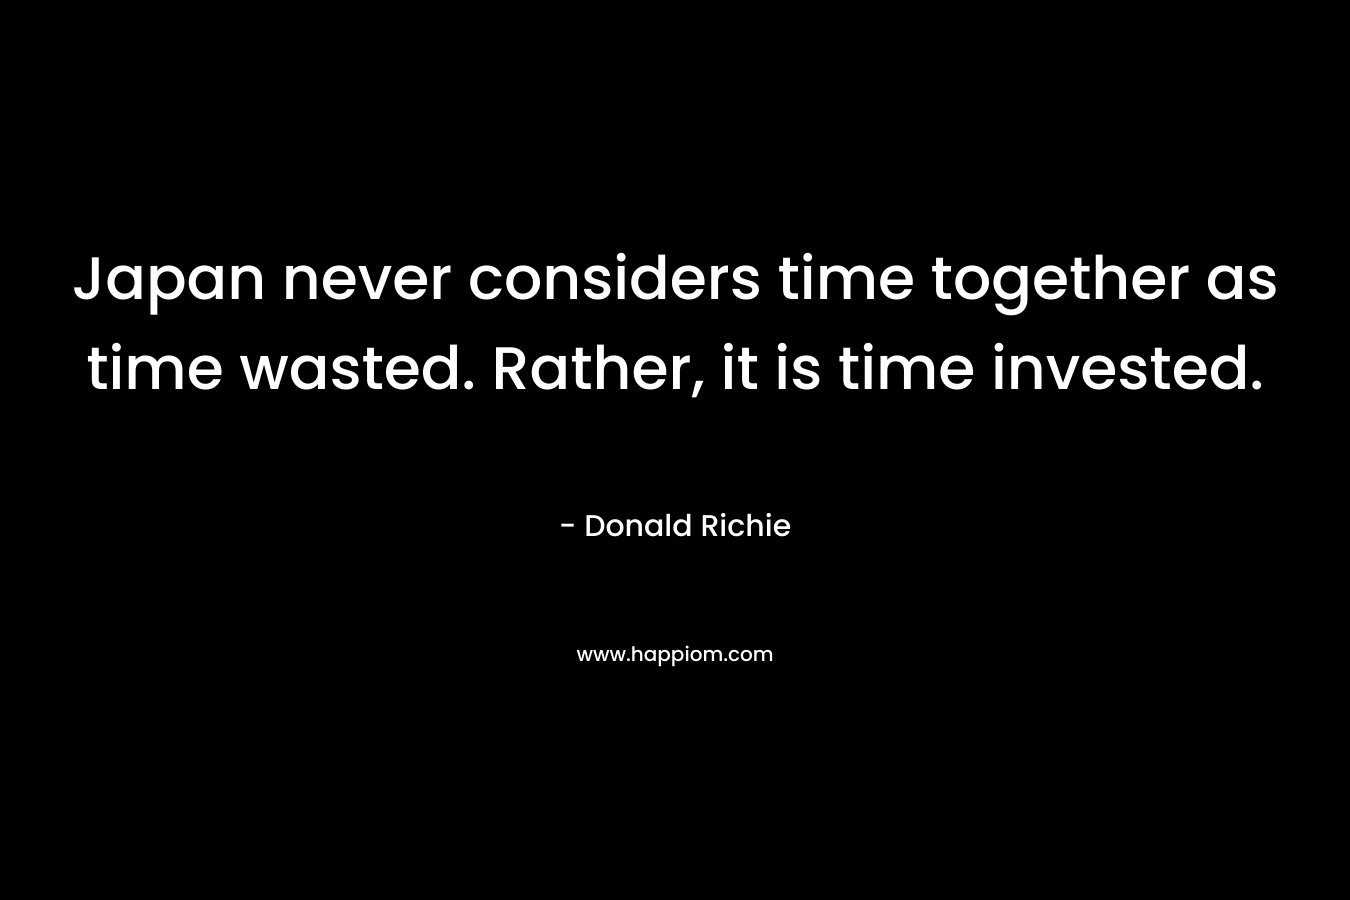 Japan never considers time together as time wasted. Rather, it is time invested. – Donald Richie